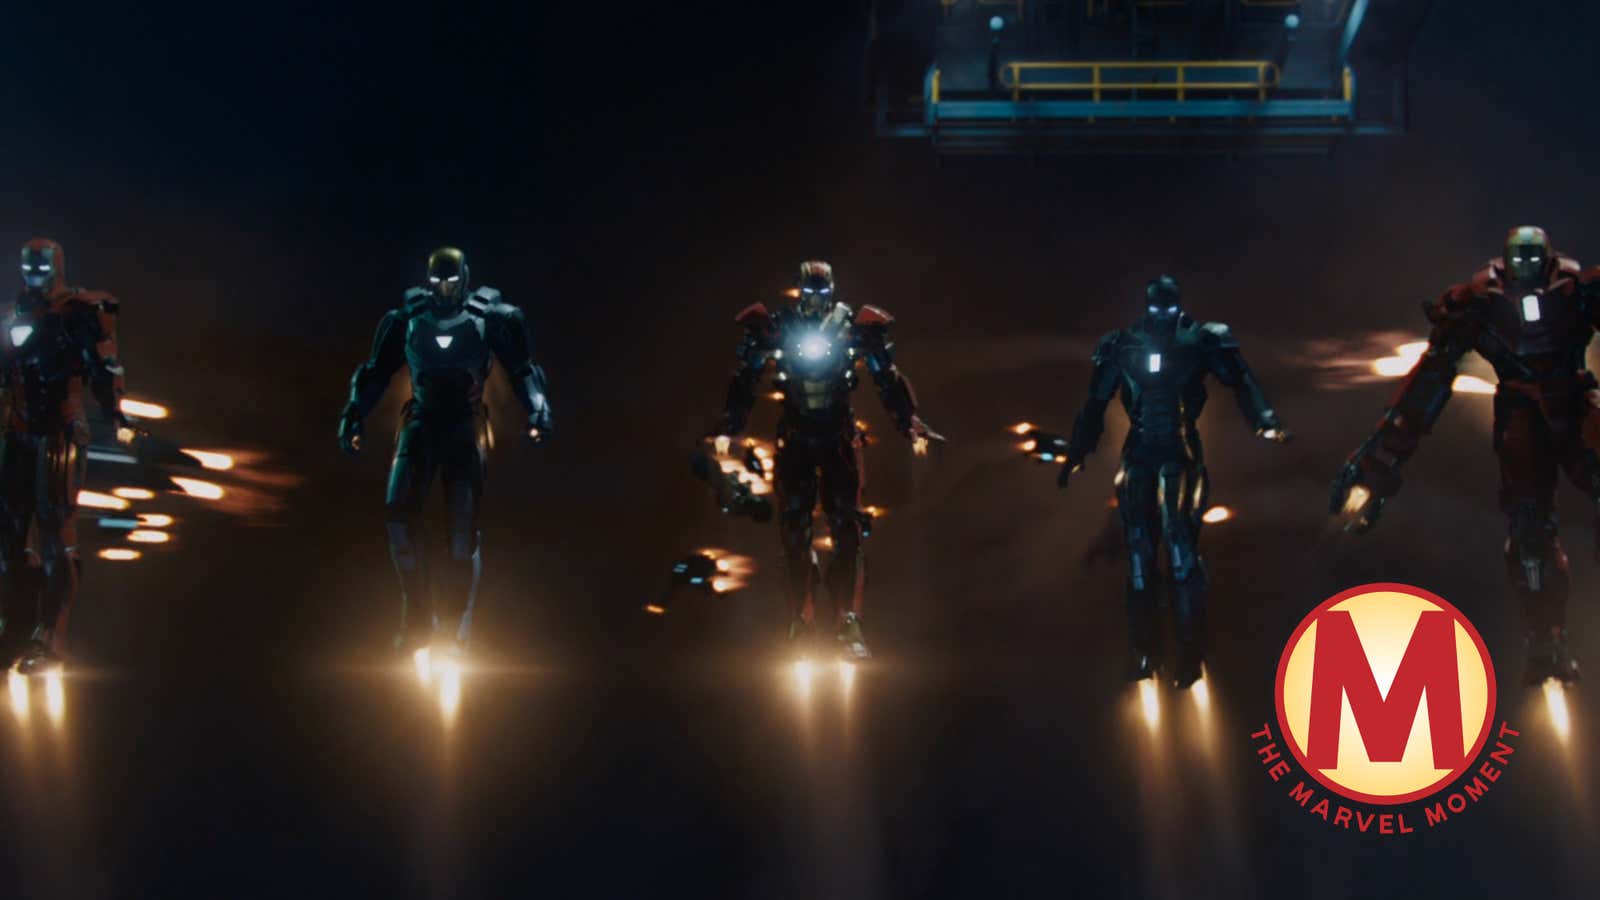 <i>Iron Man 3</i> blew up Tony’s suits, but can any big change really take in this mega franchise?